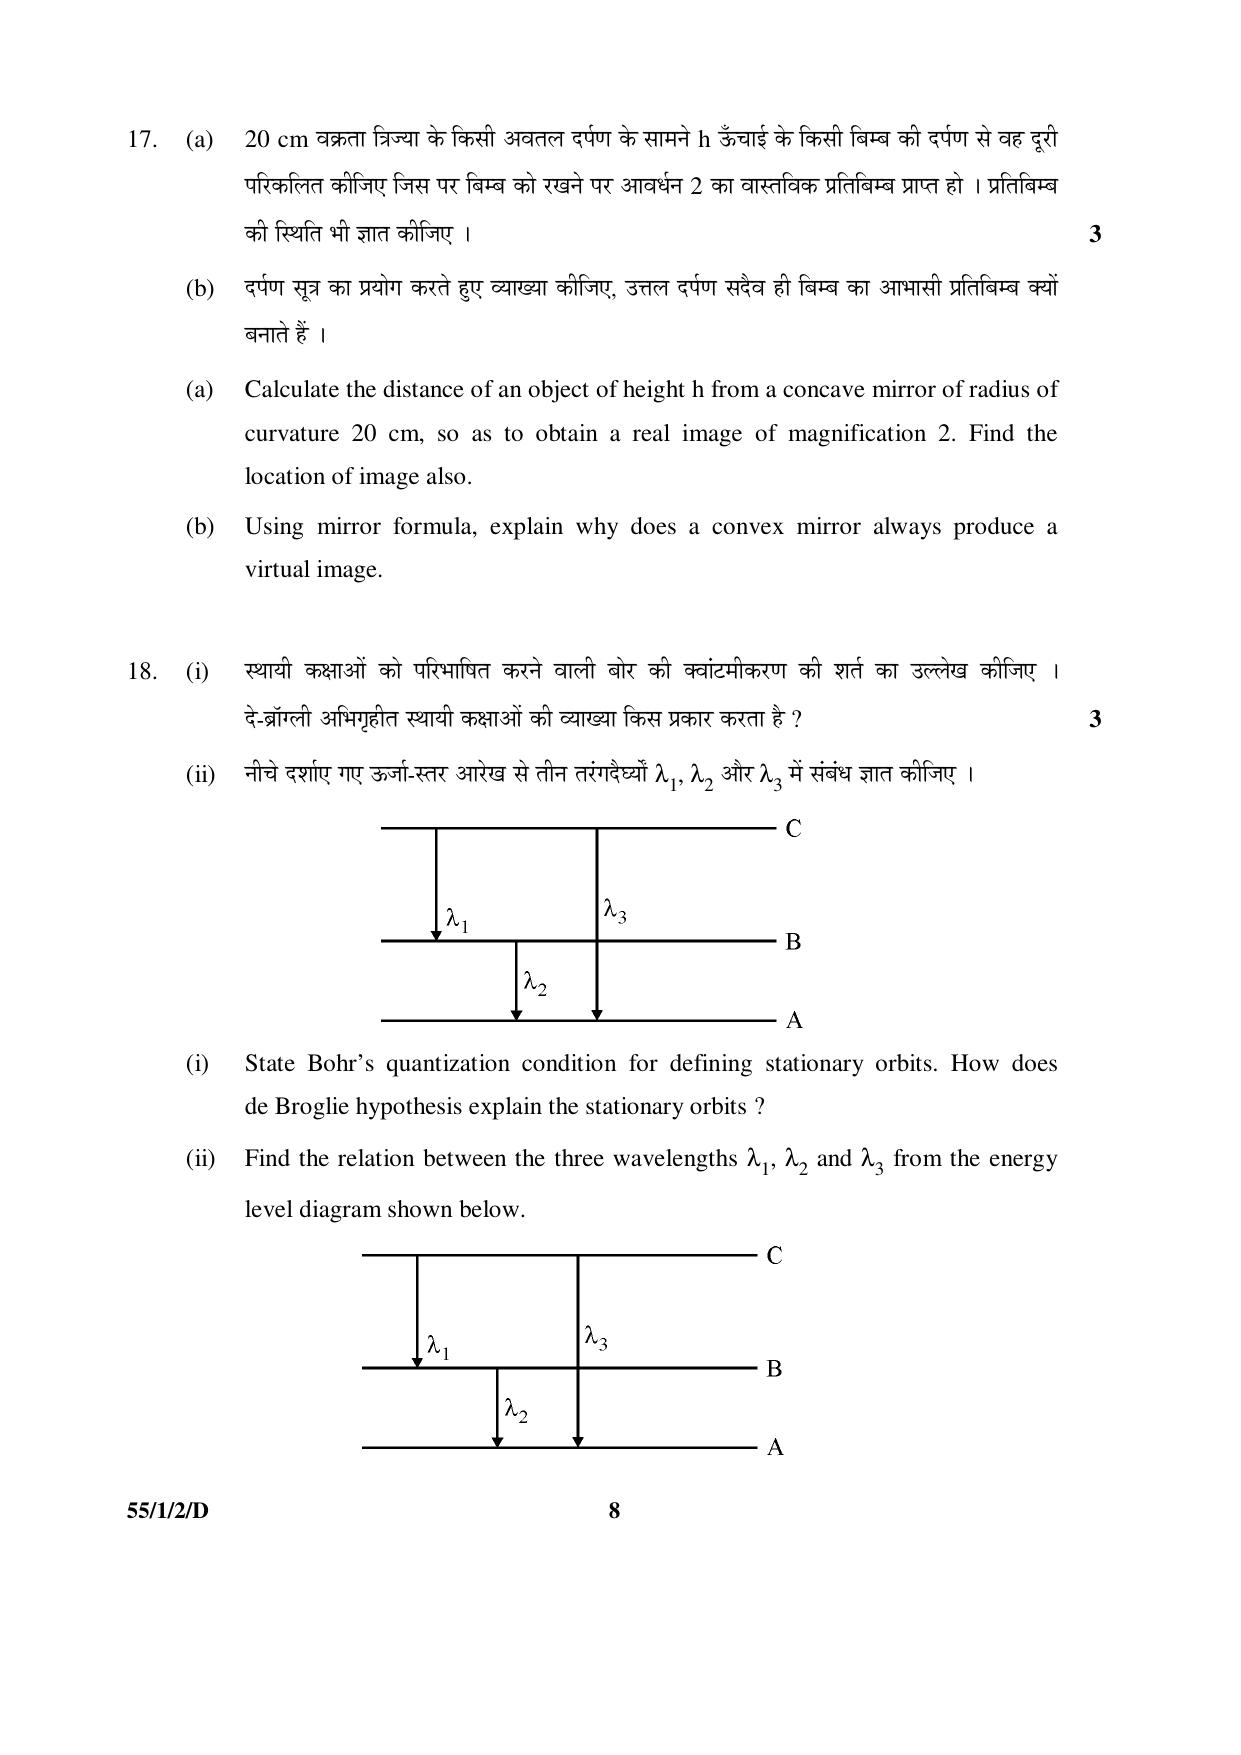 CBSE Class 12 55-1-2-D PHYSICS 2016 Question Paper - Page 8